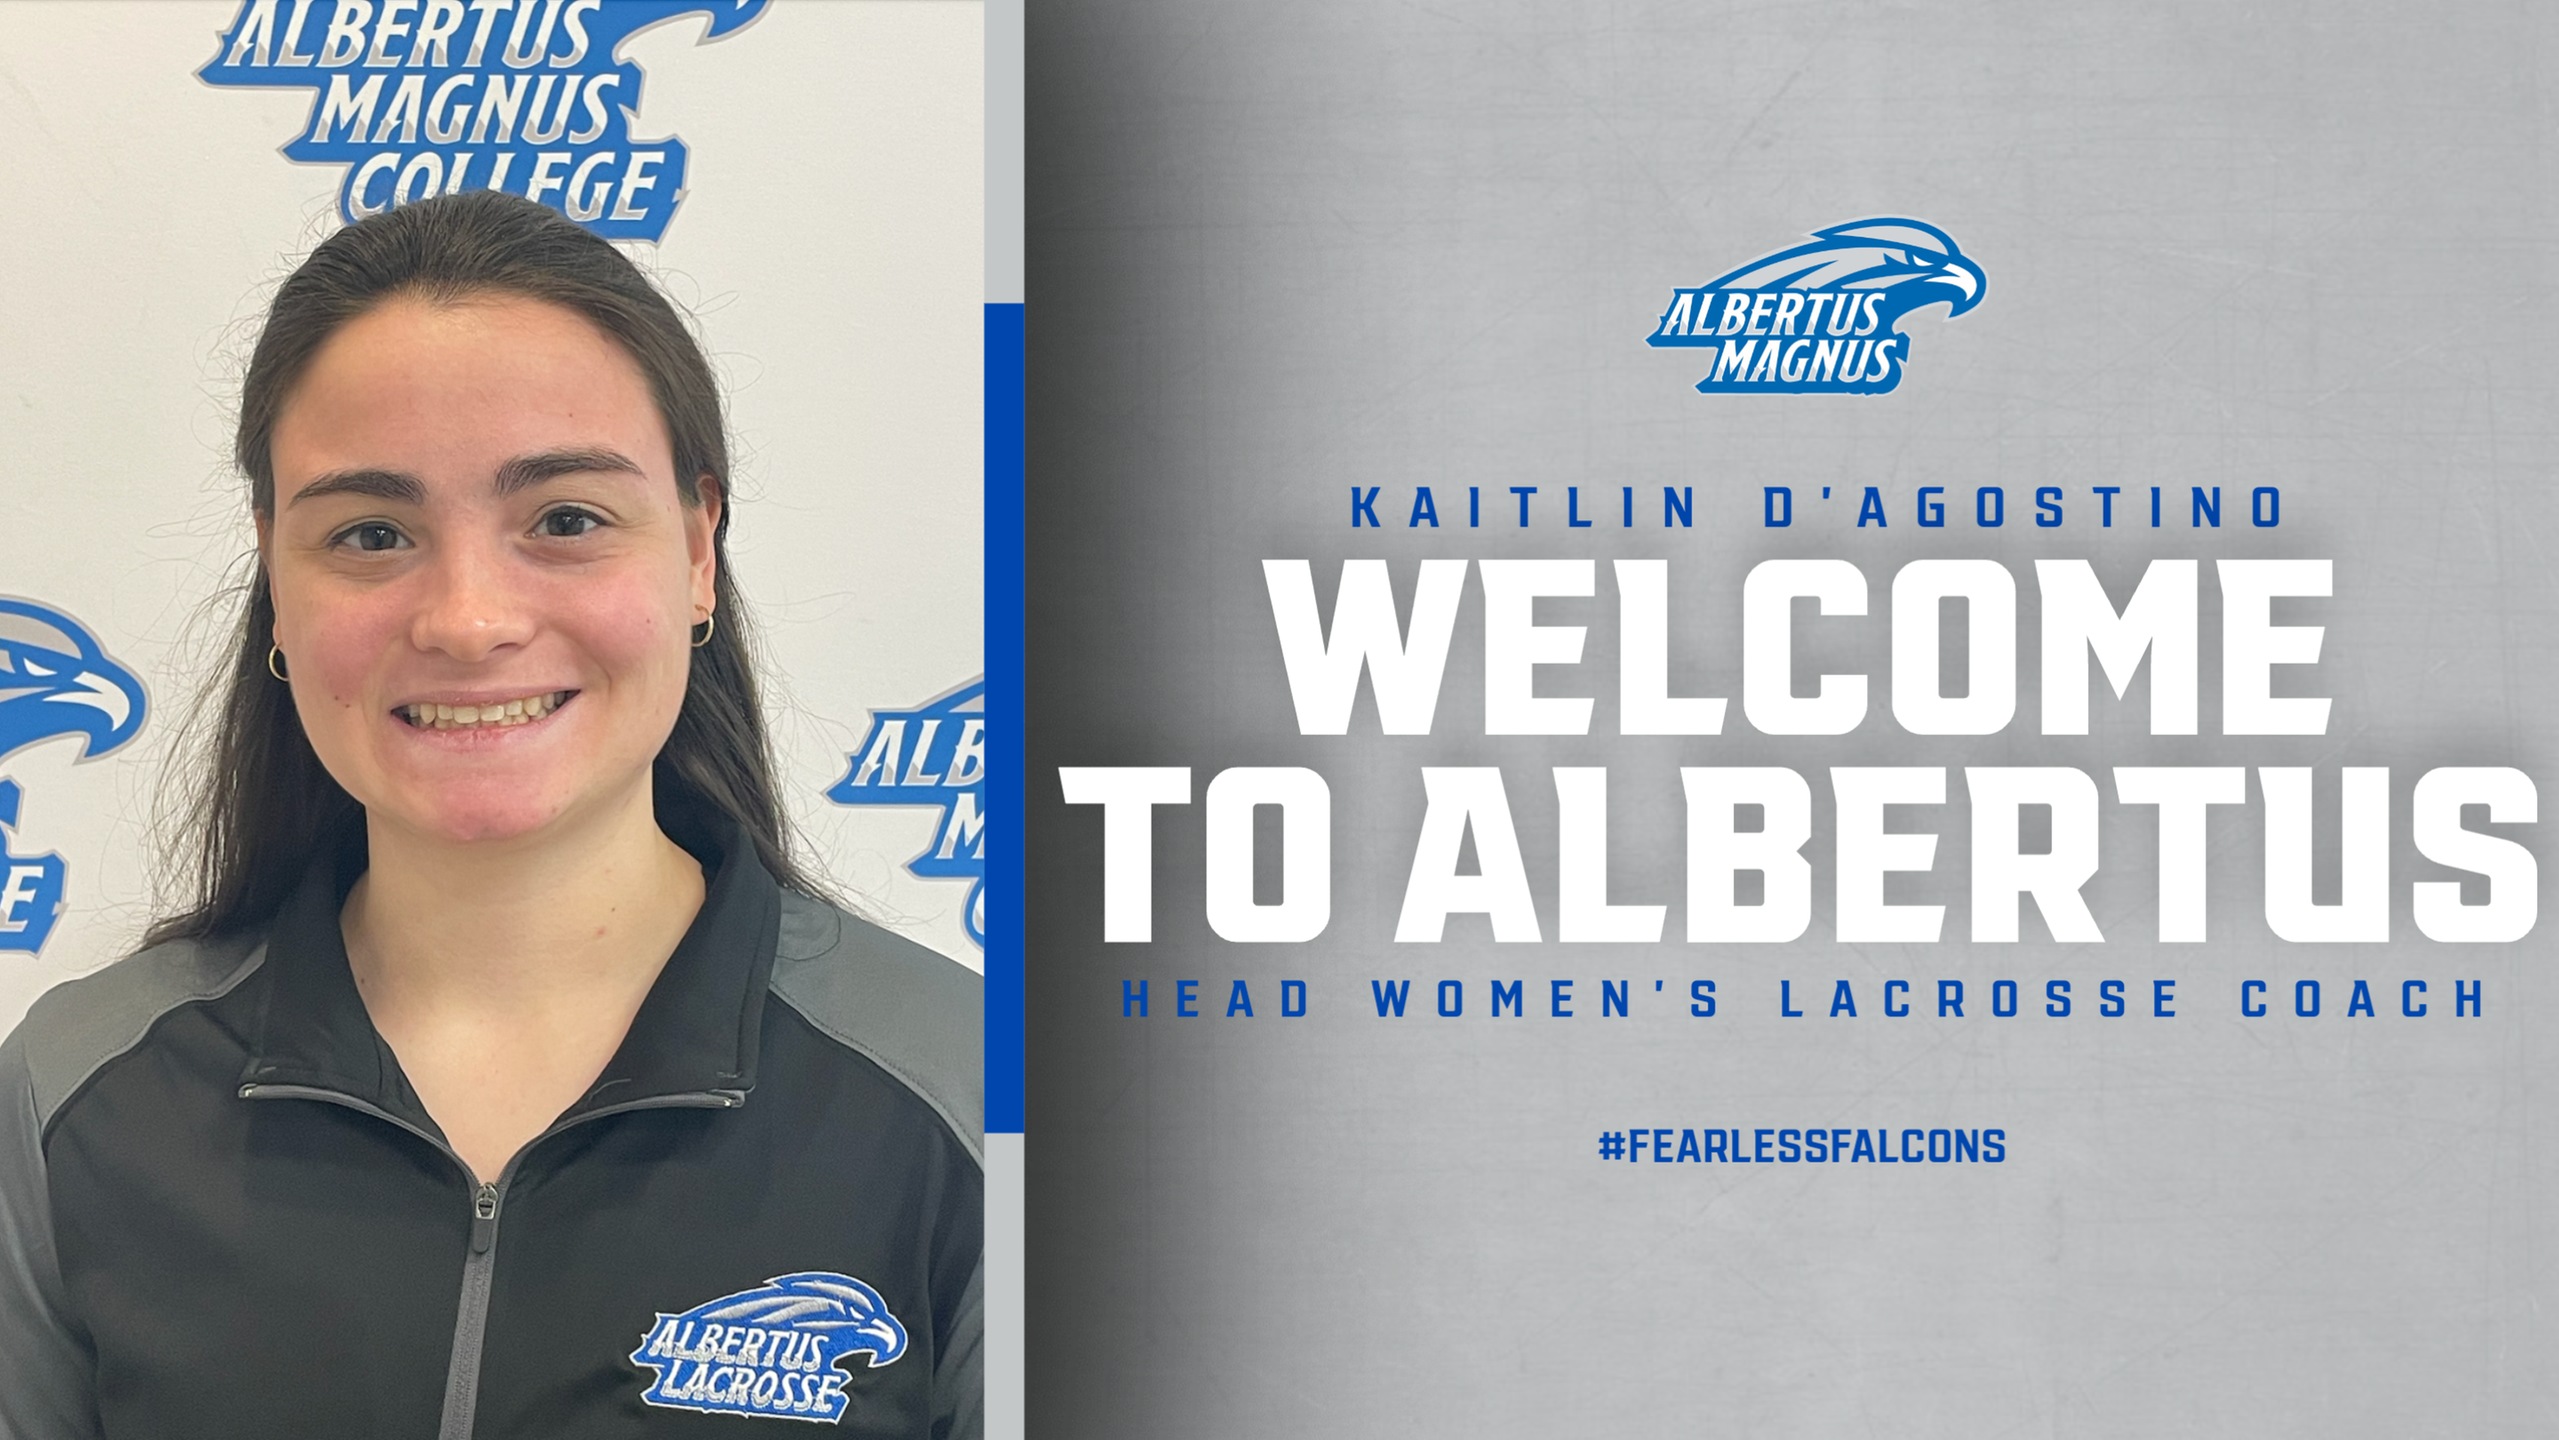 D'Agostino Named Falcons' Head Women's Lacrosse Coach